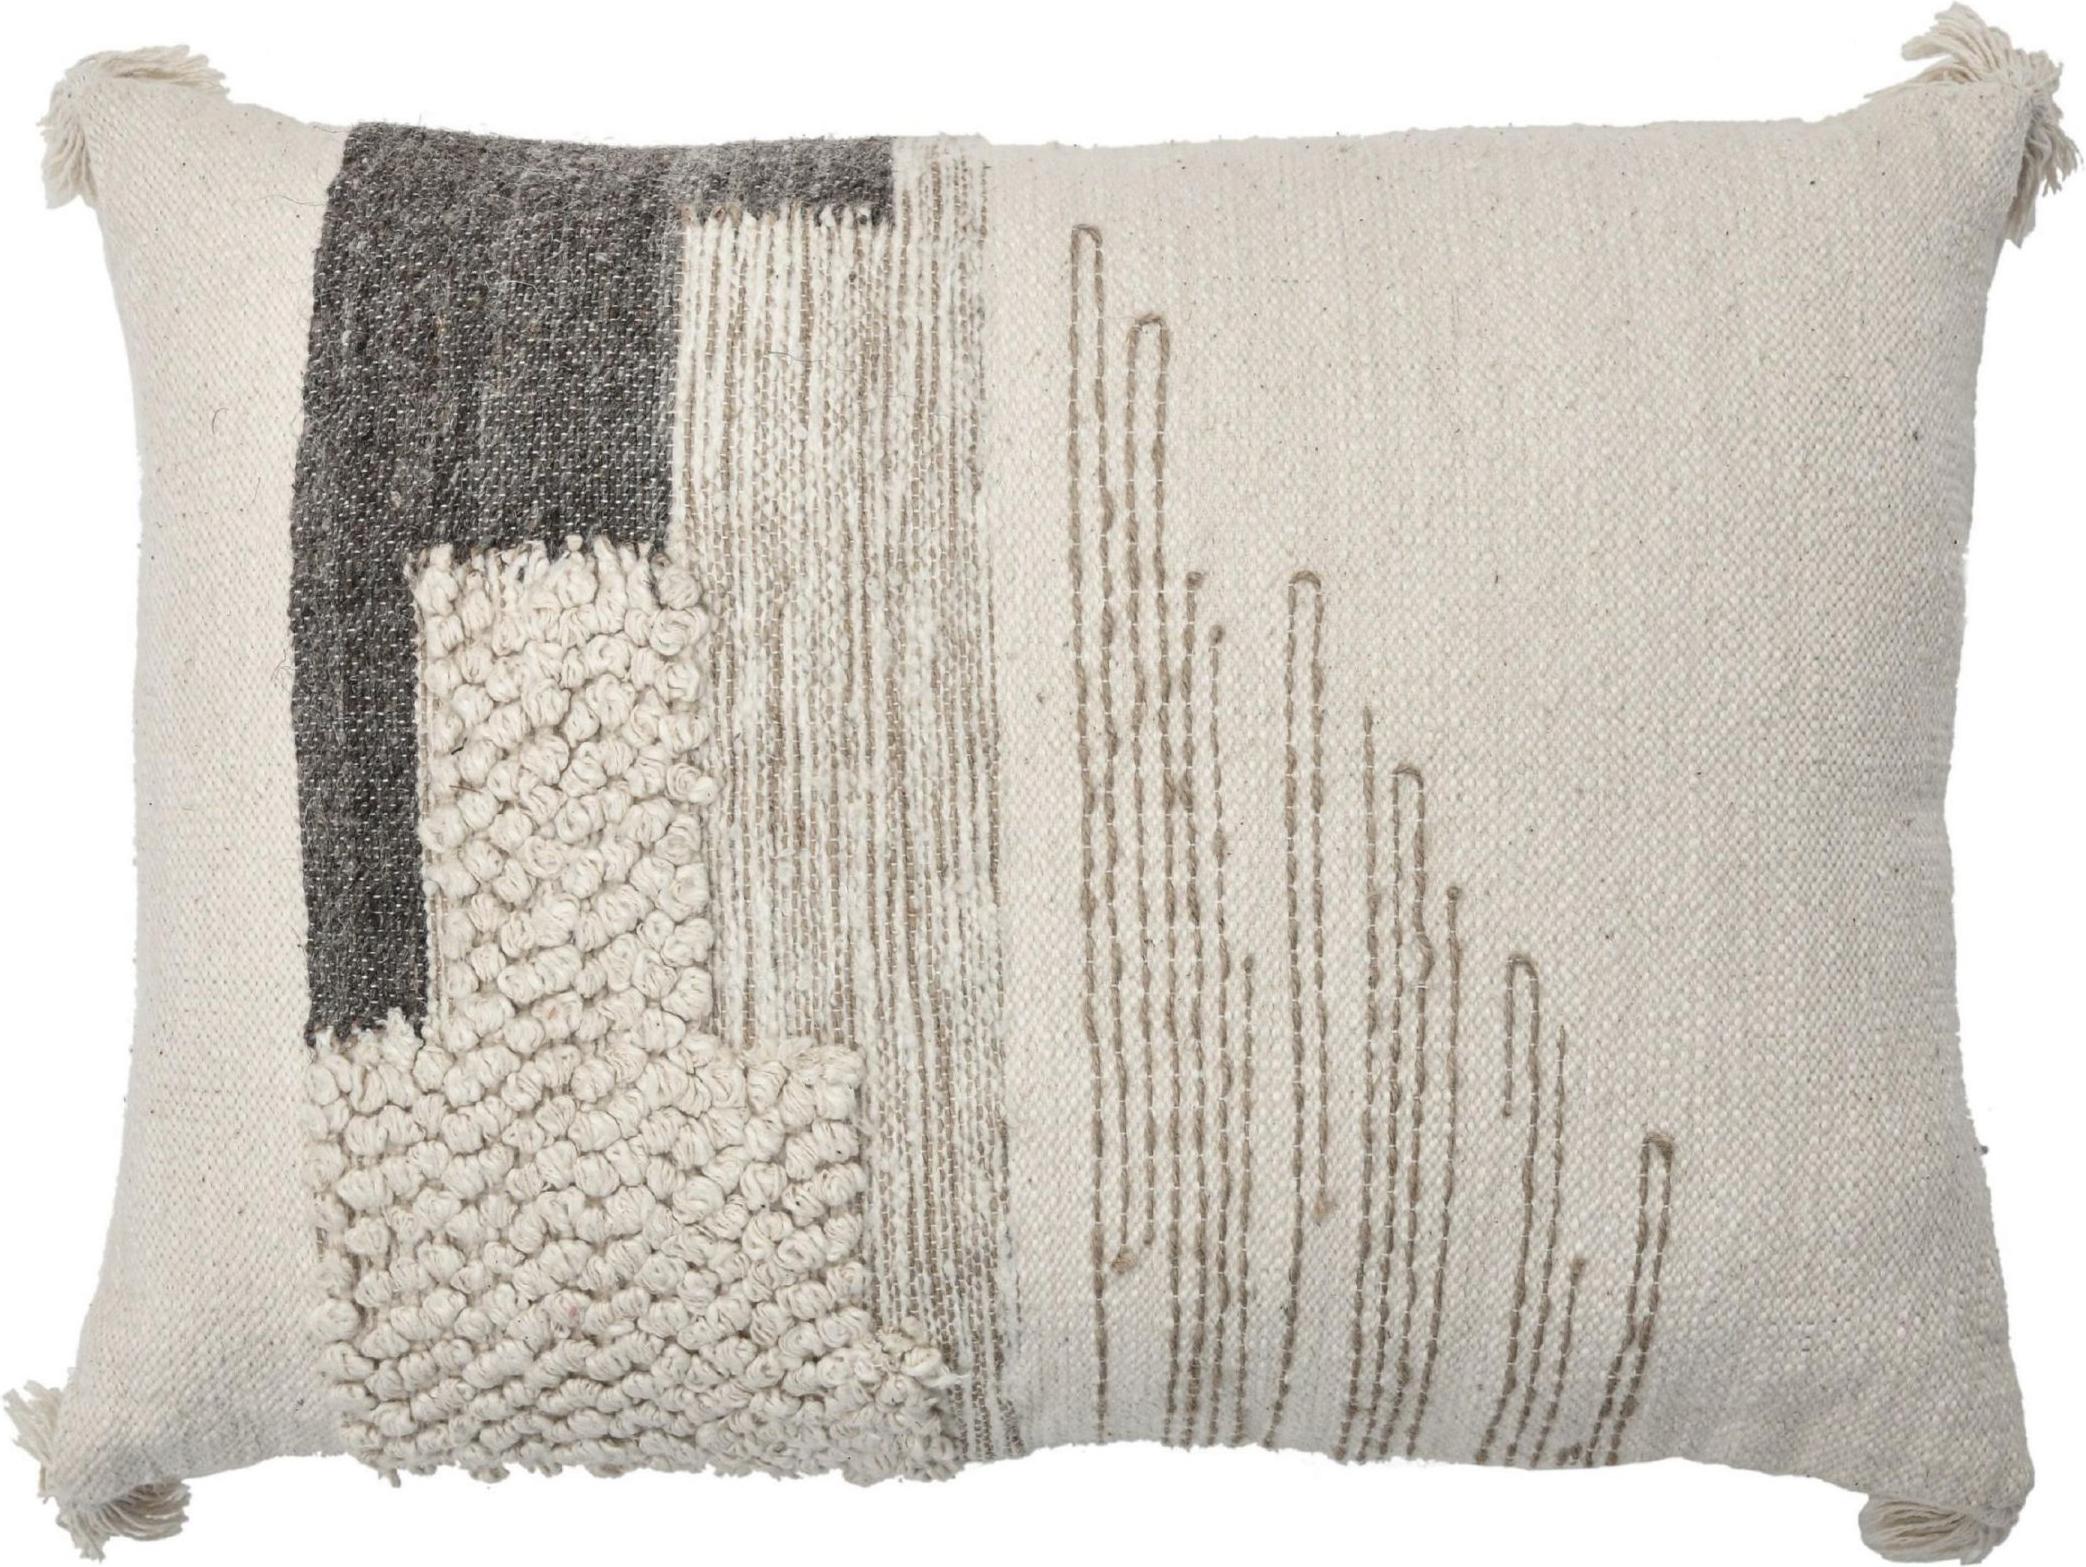 Hand-Knotted Contemporary Boho Chic Style Wool and Cotton Pillow In Beige For Sale